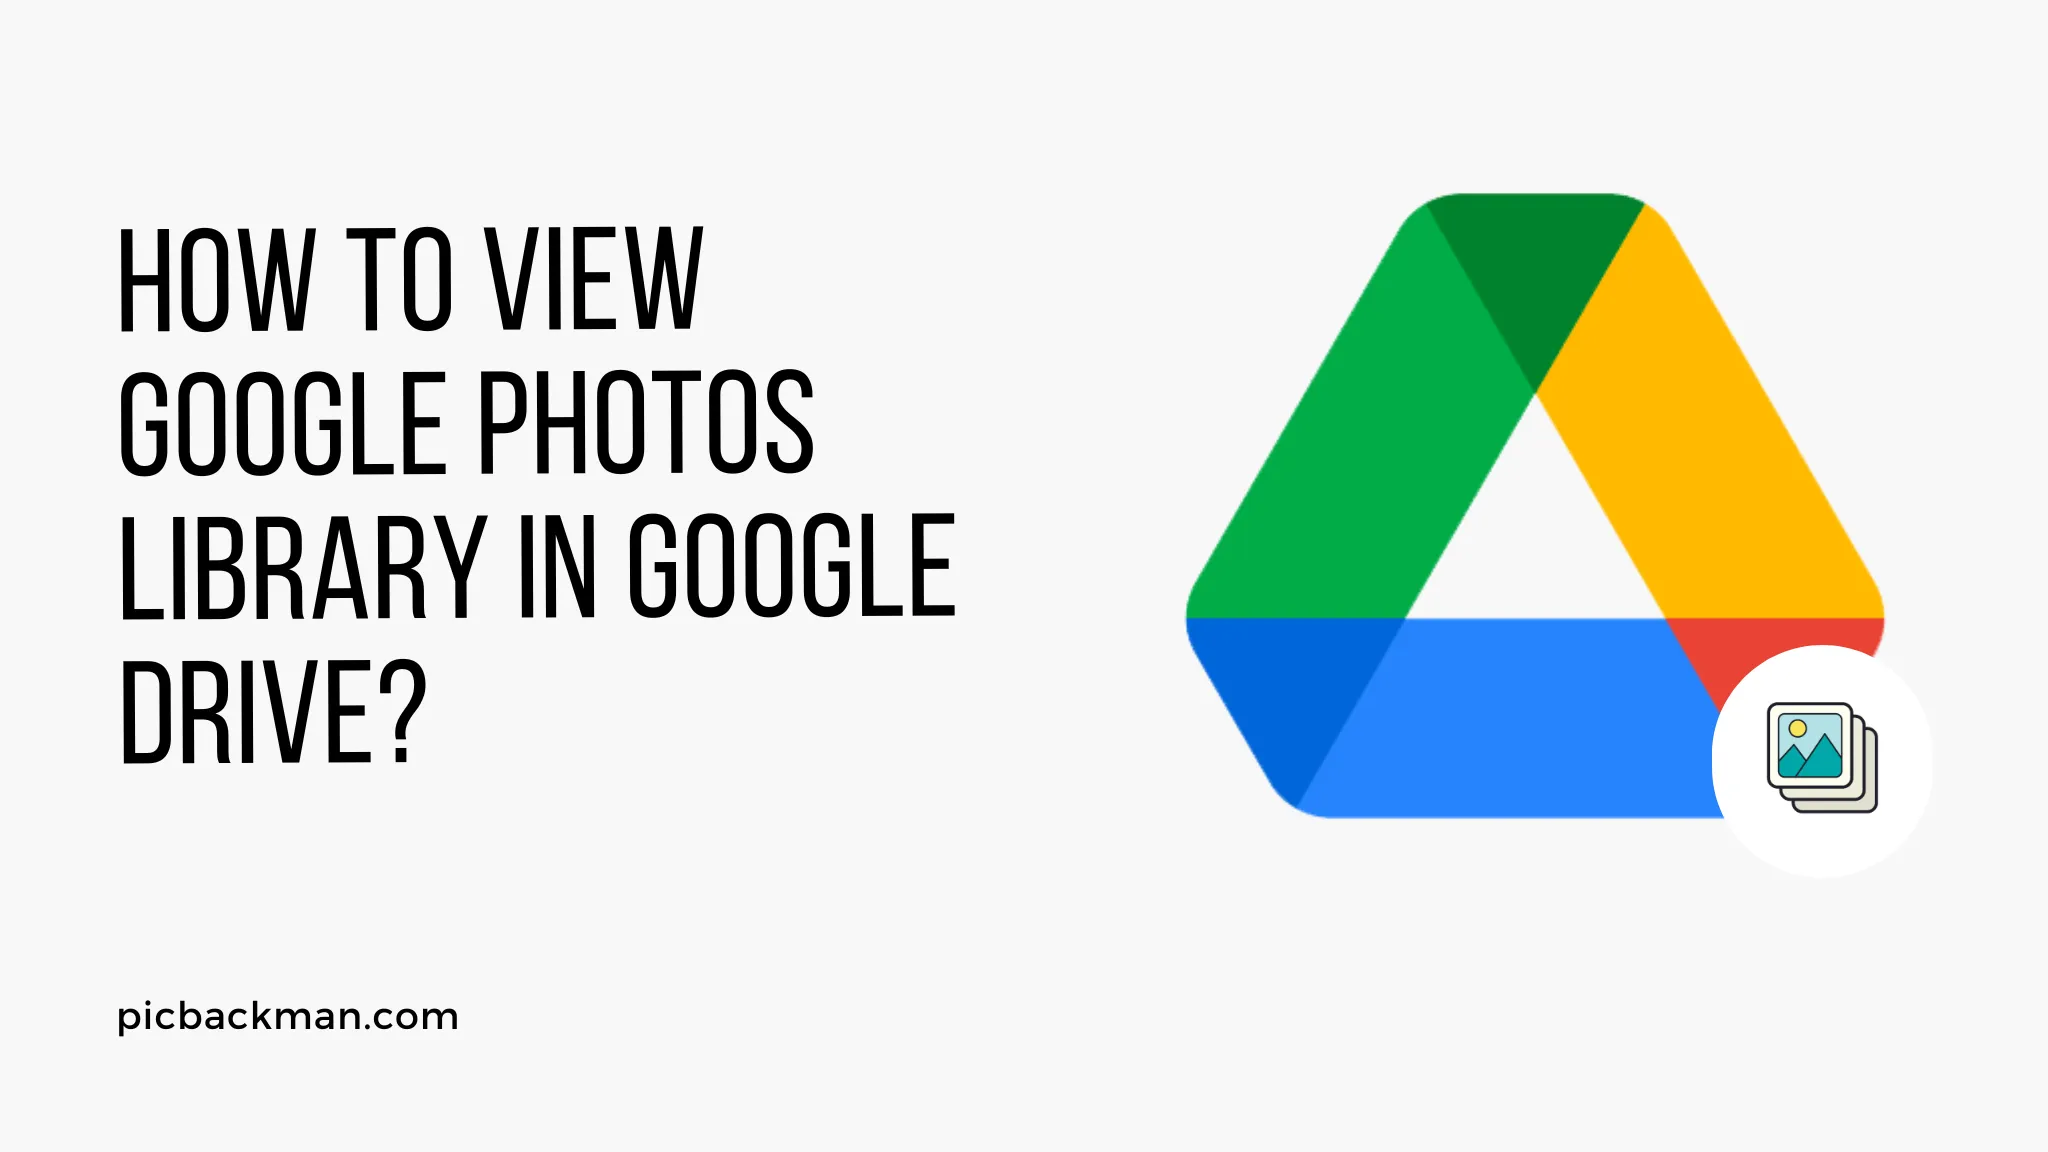 How to View Google Photos Library in Google Drive